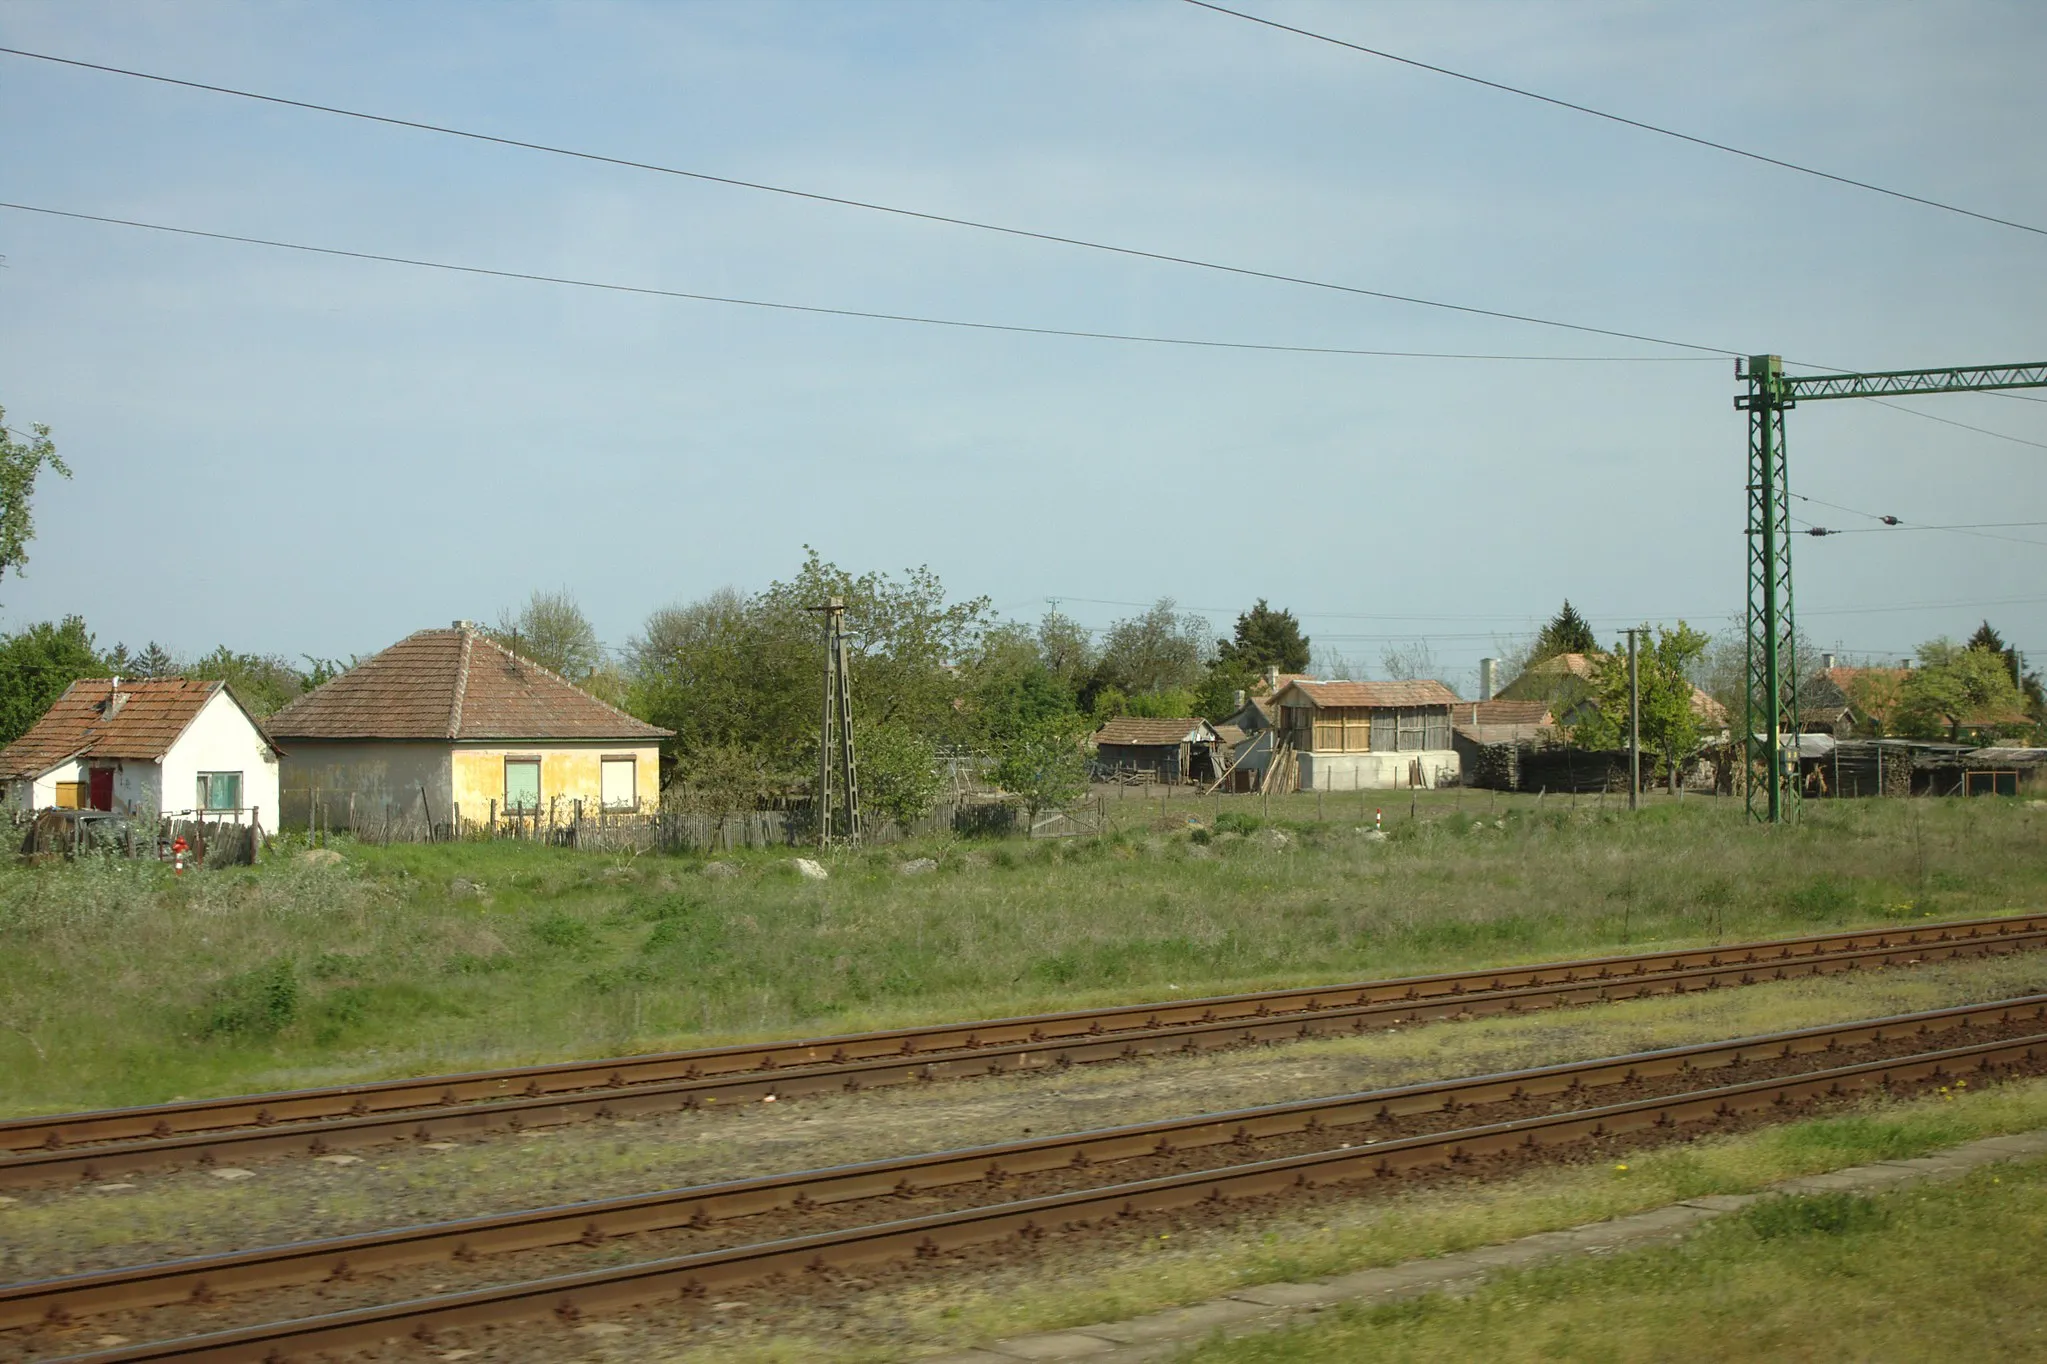 Photo showing: Some houses and a part of the train station in the town of Kelebia, Hungary